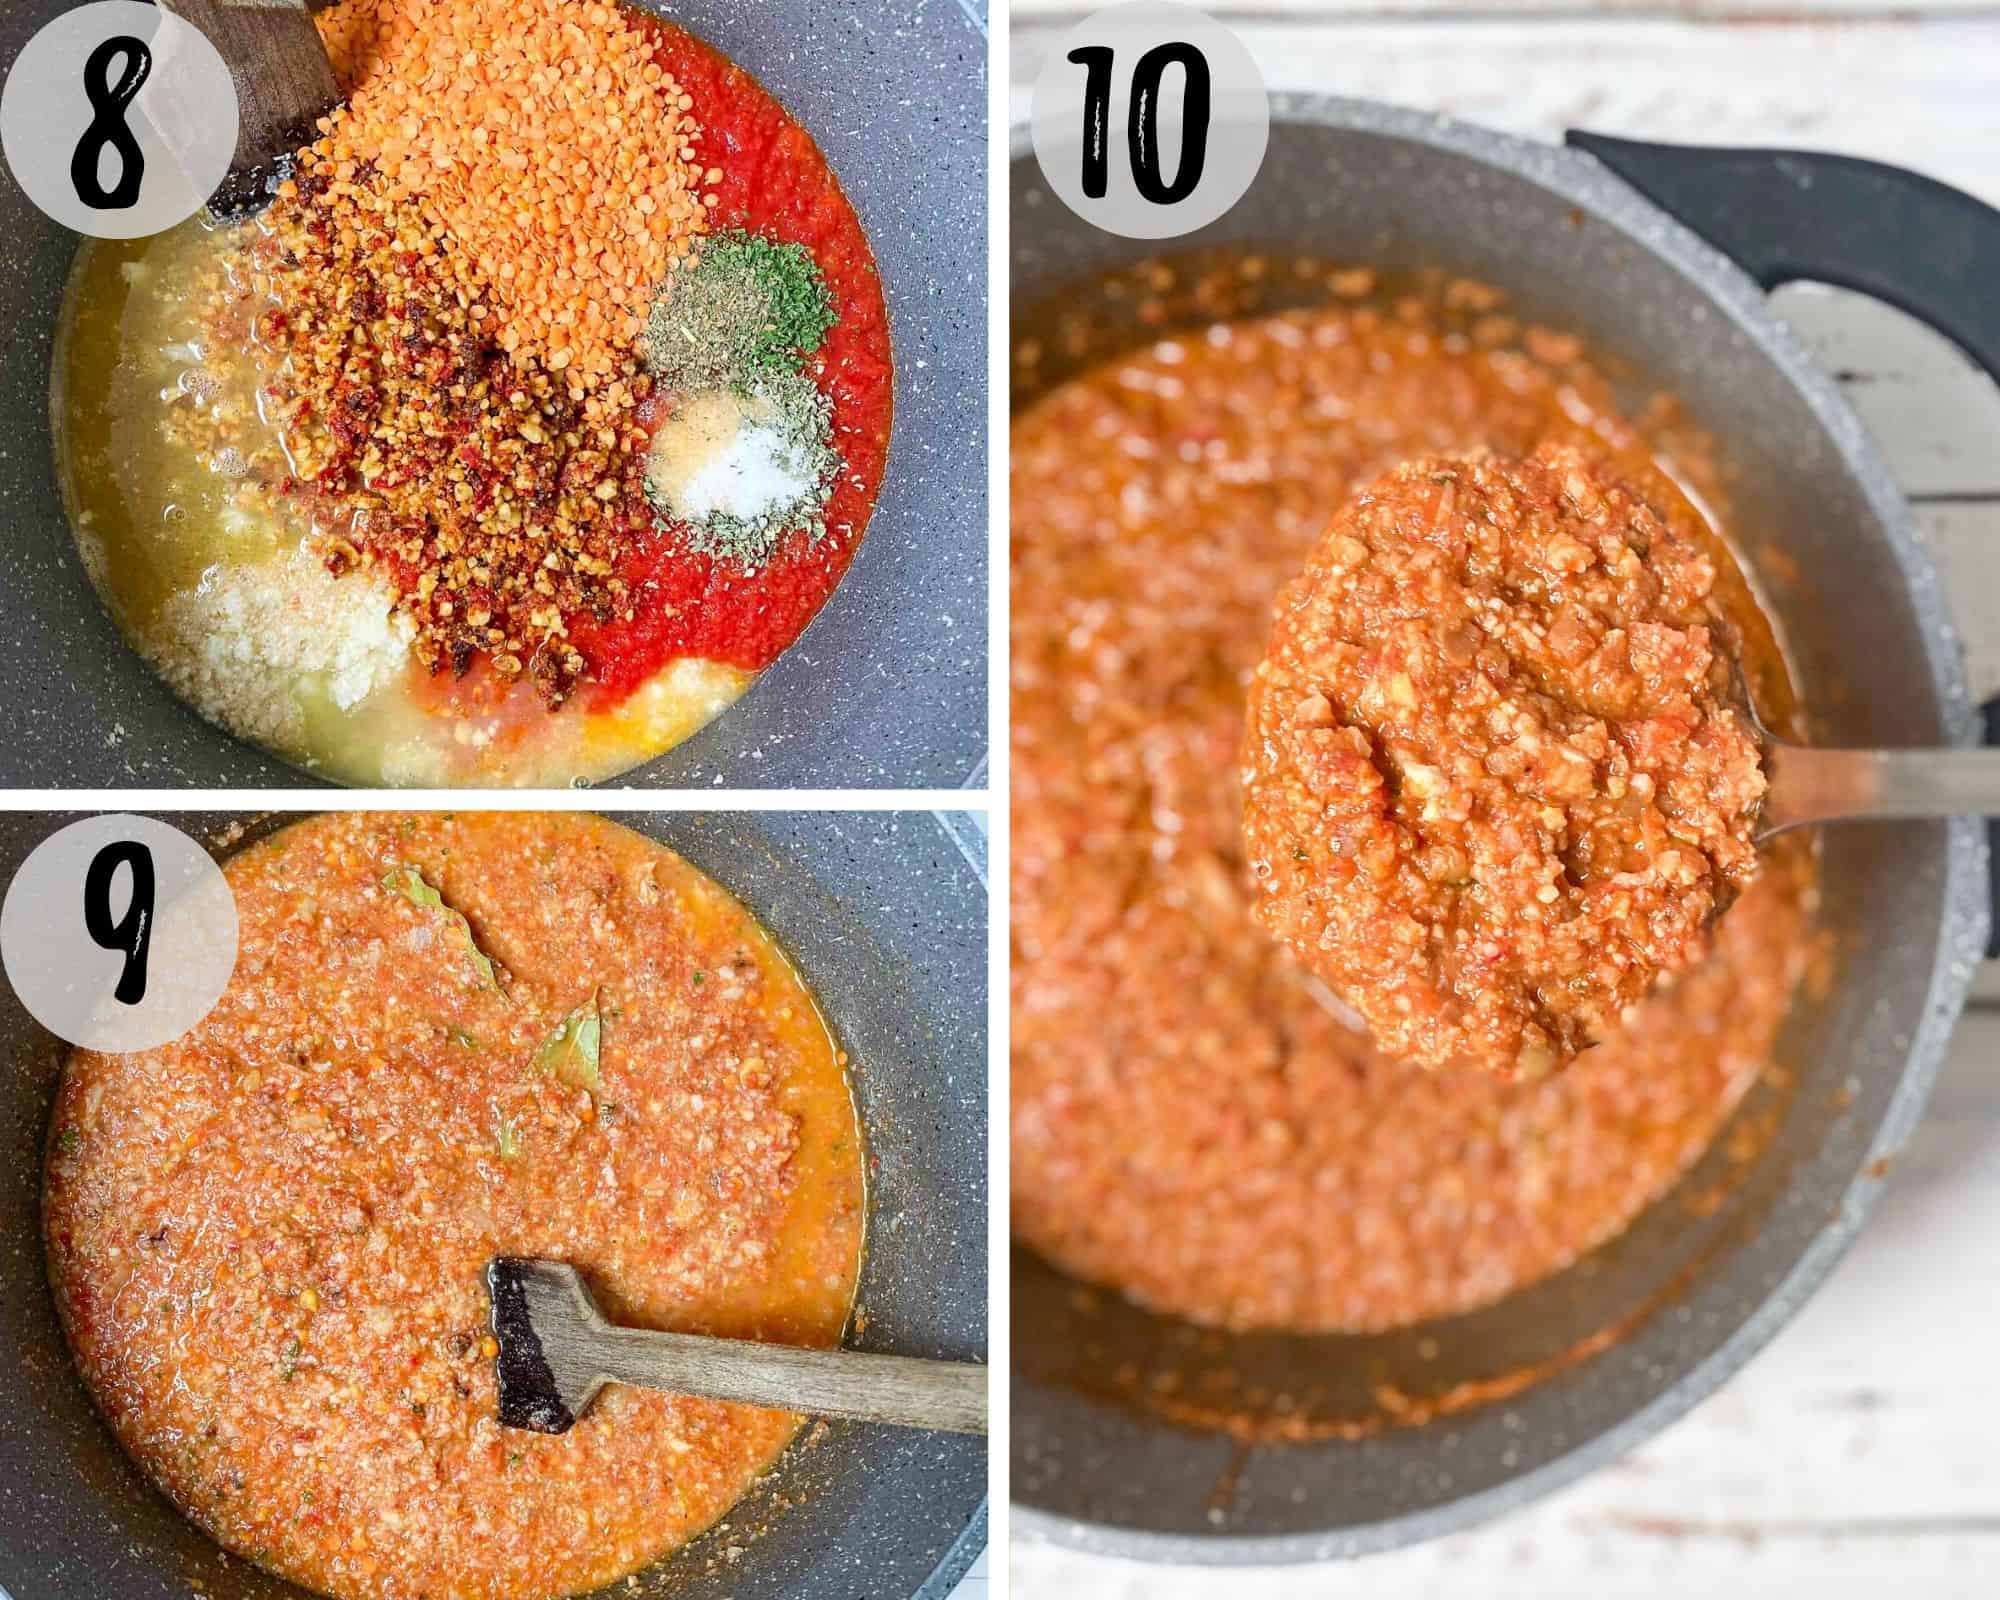 vegetable crumbles, sauce, lentils and seasoning in large sauce pot to make bolognese sauce